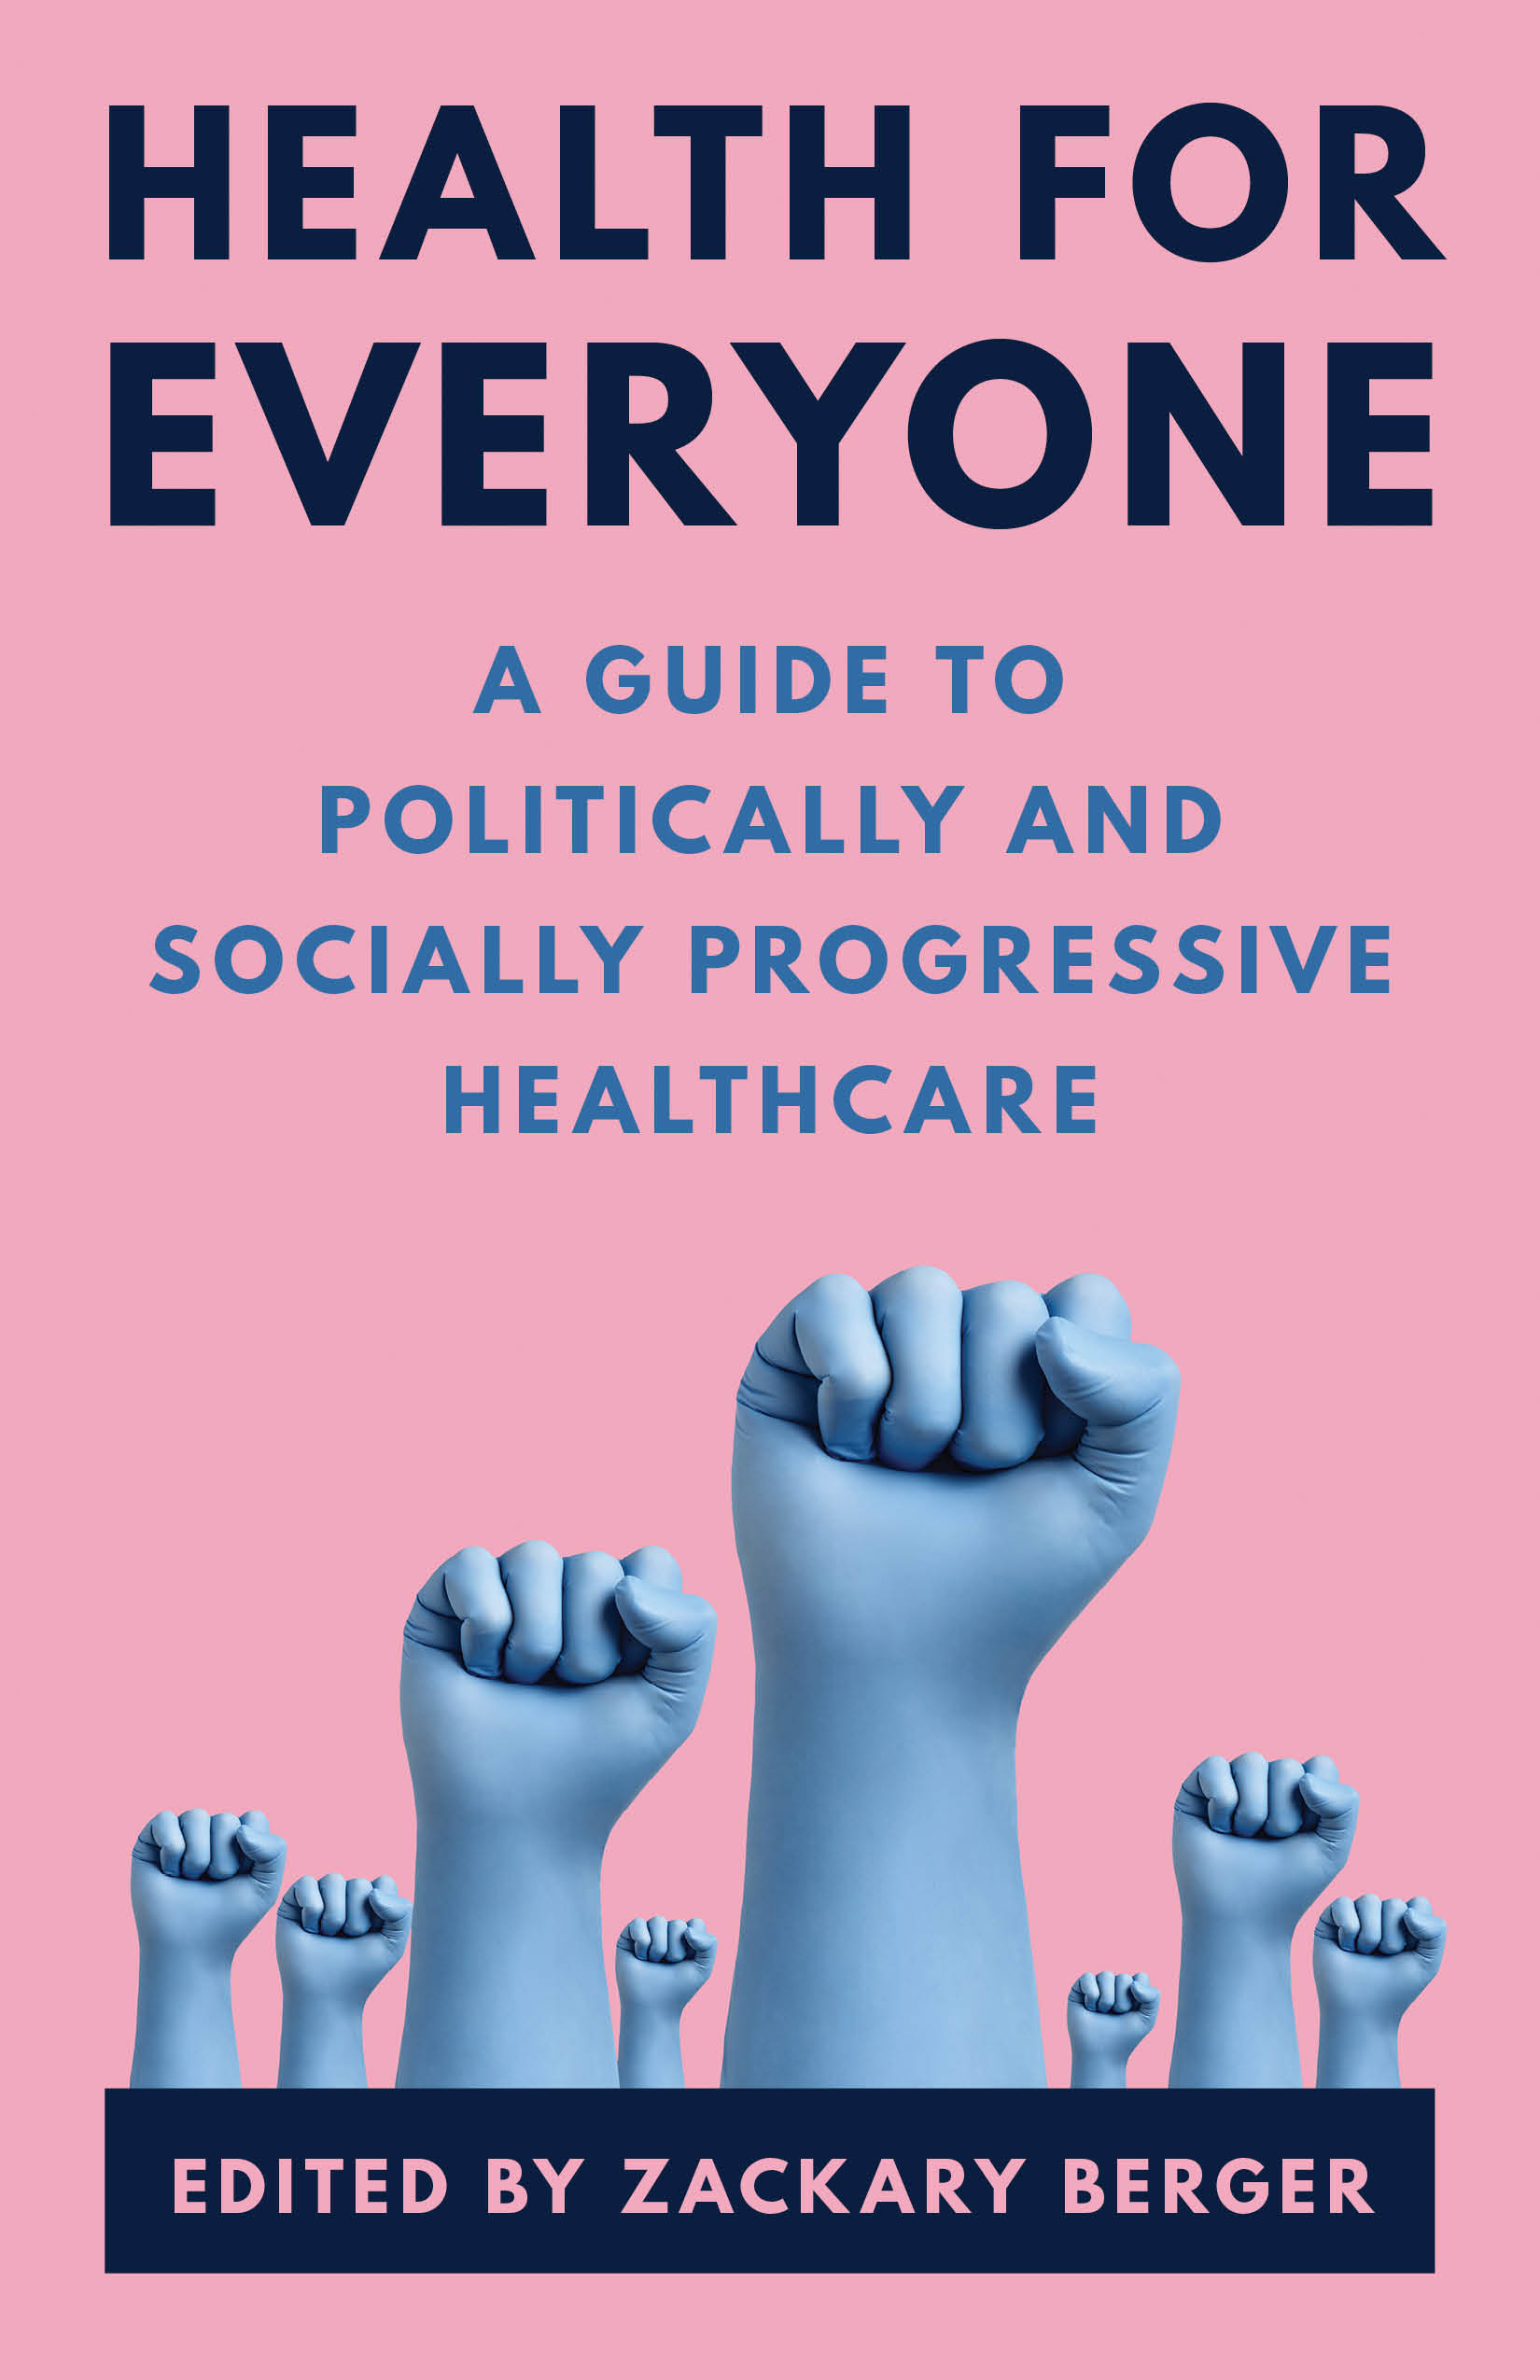 Health for Everyone: A Guide to Politically and Socially Progressive Healthcare